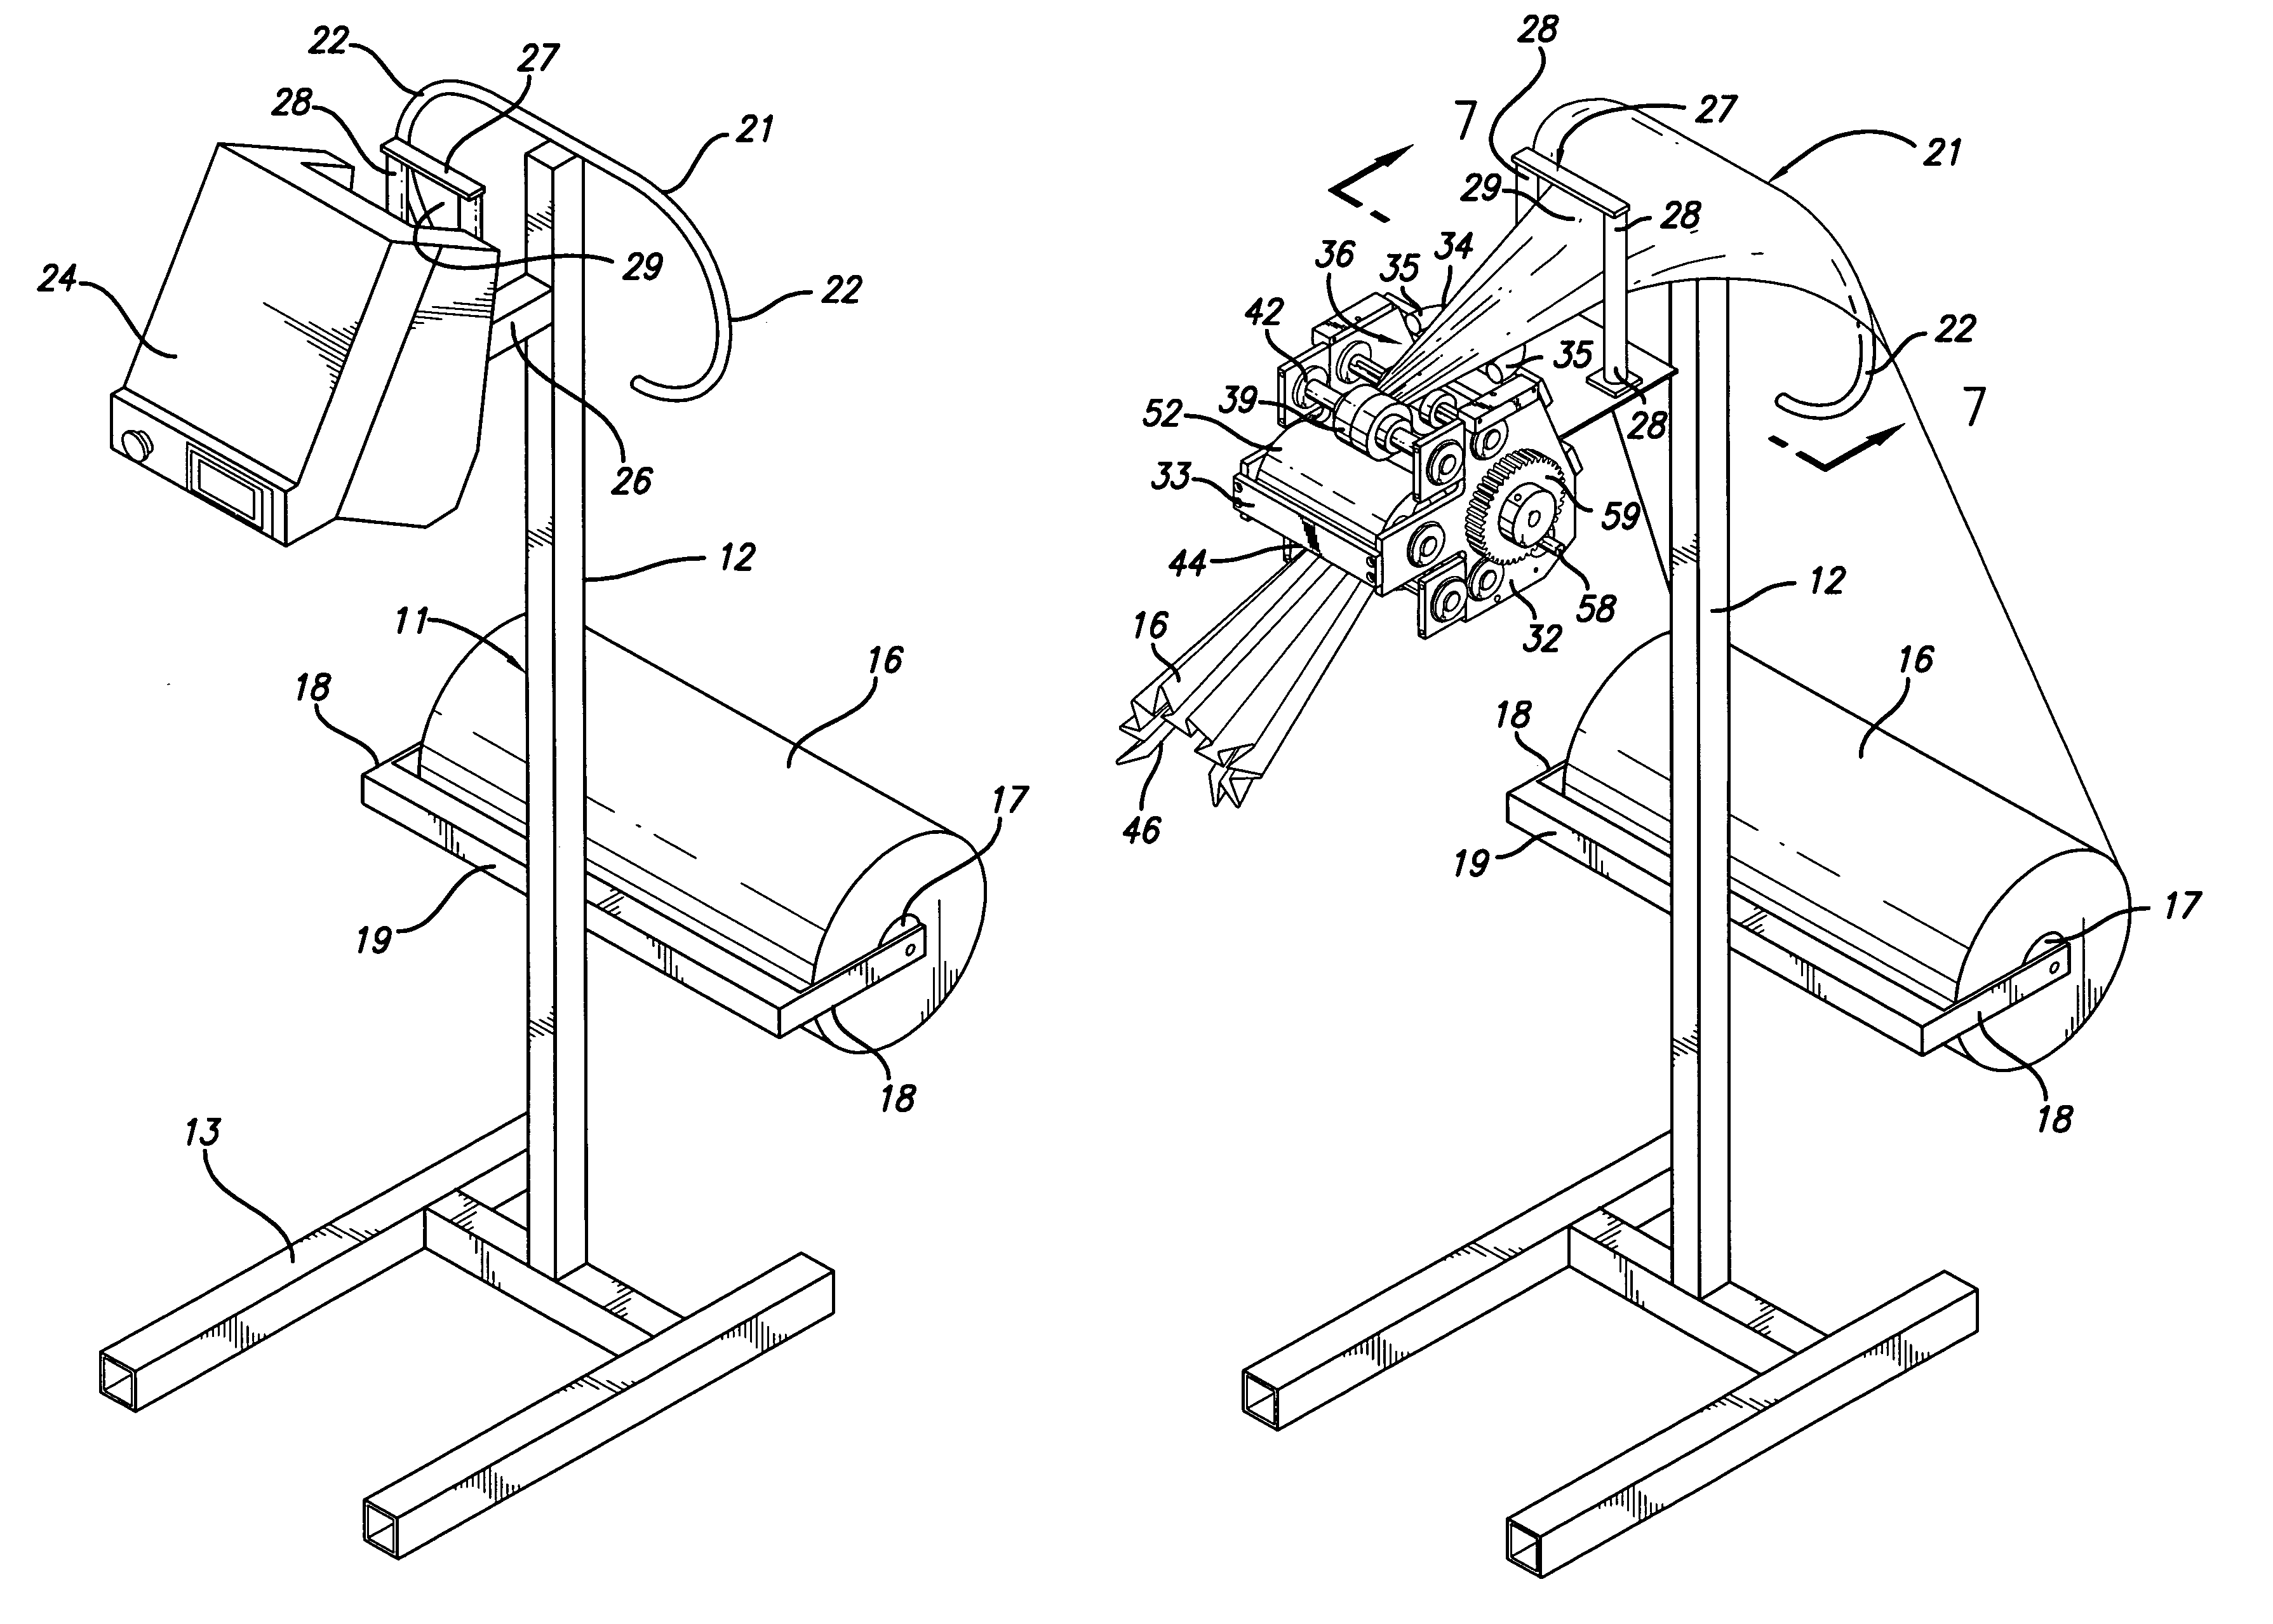 Machine and method for making paper dunnage